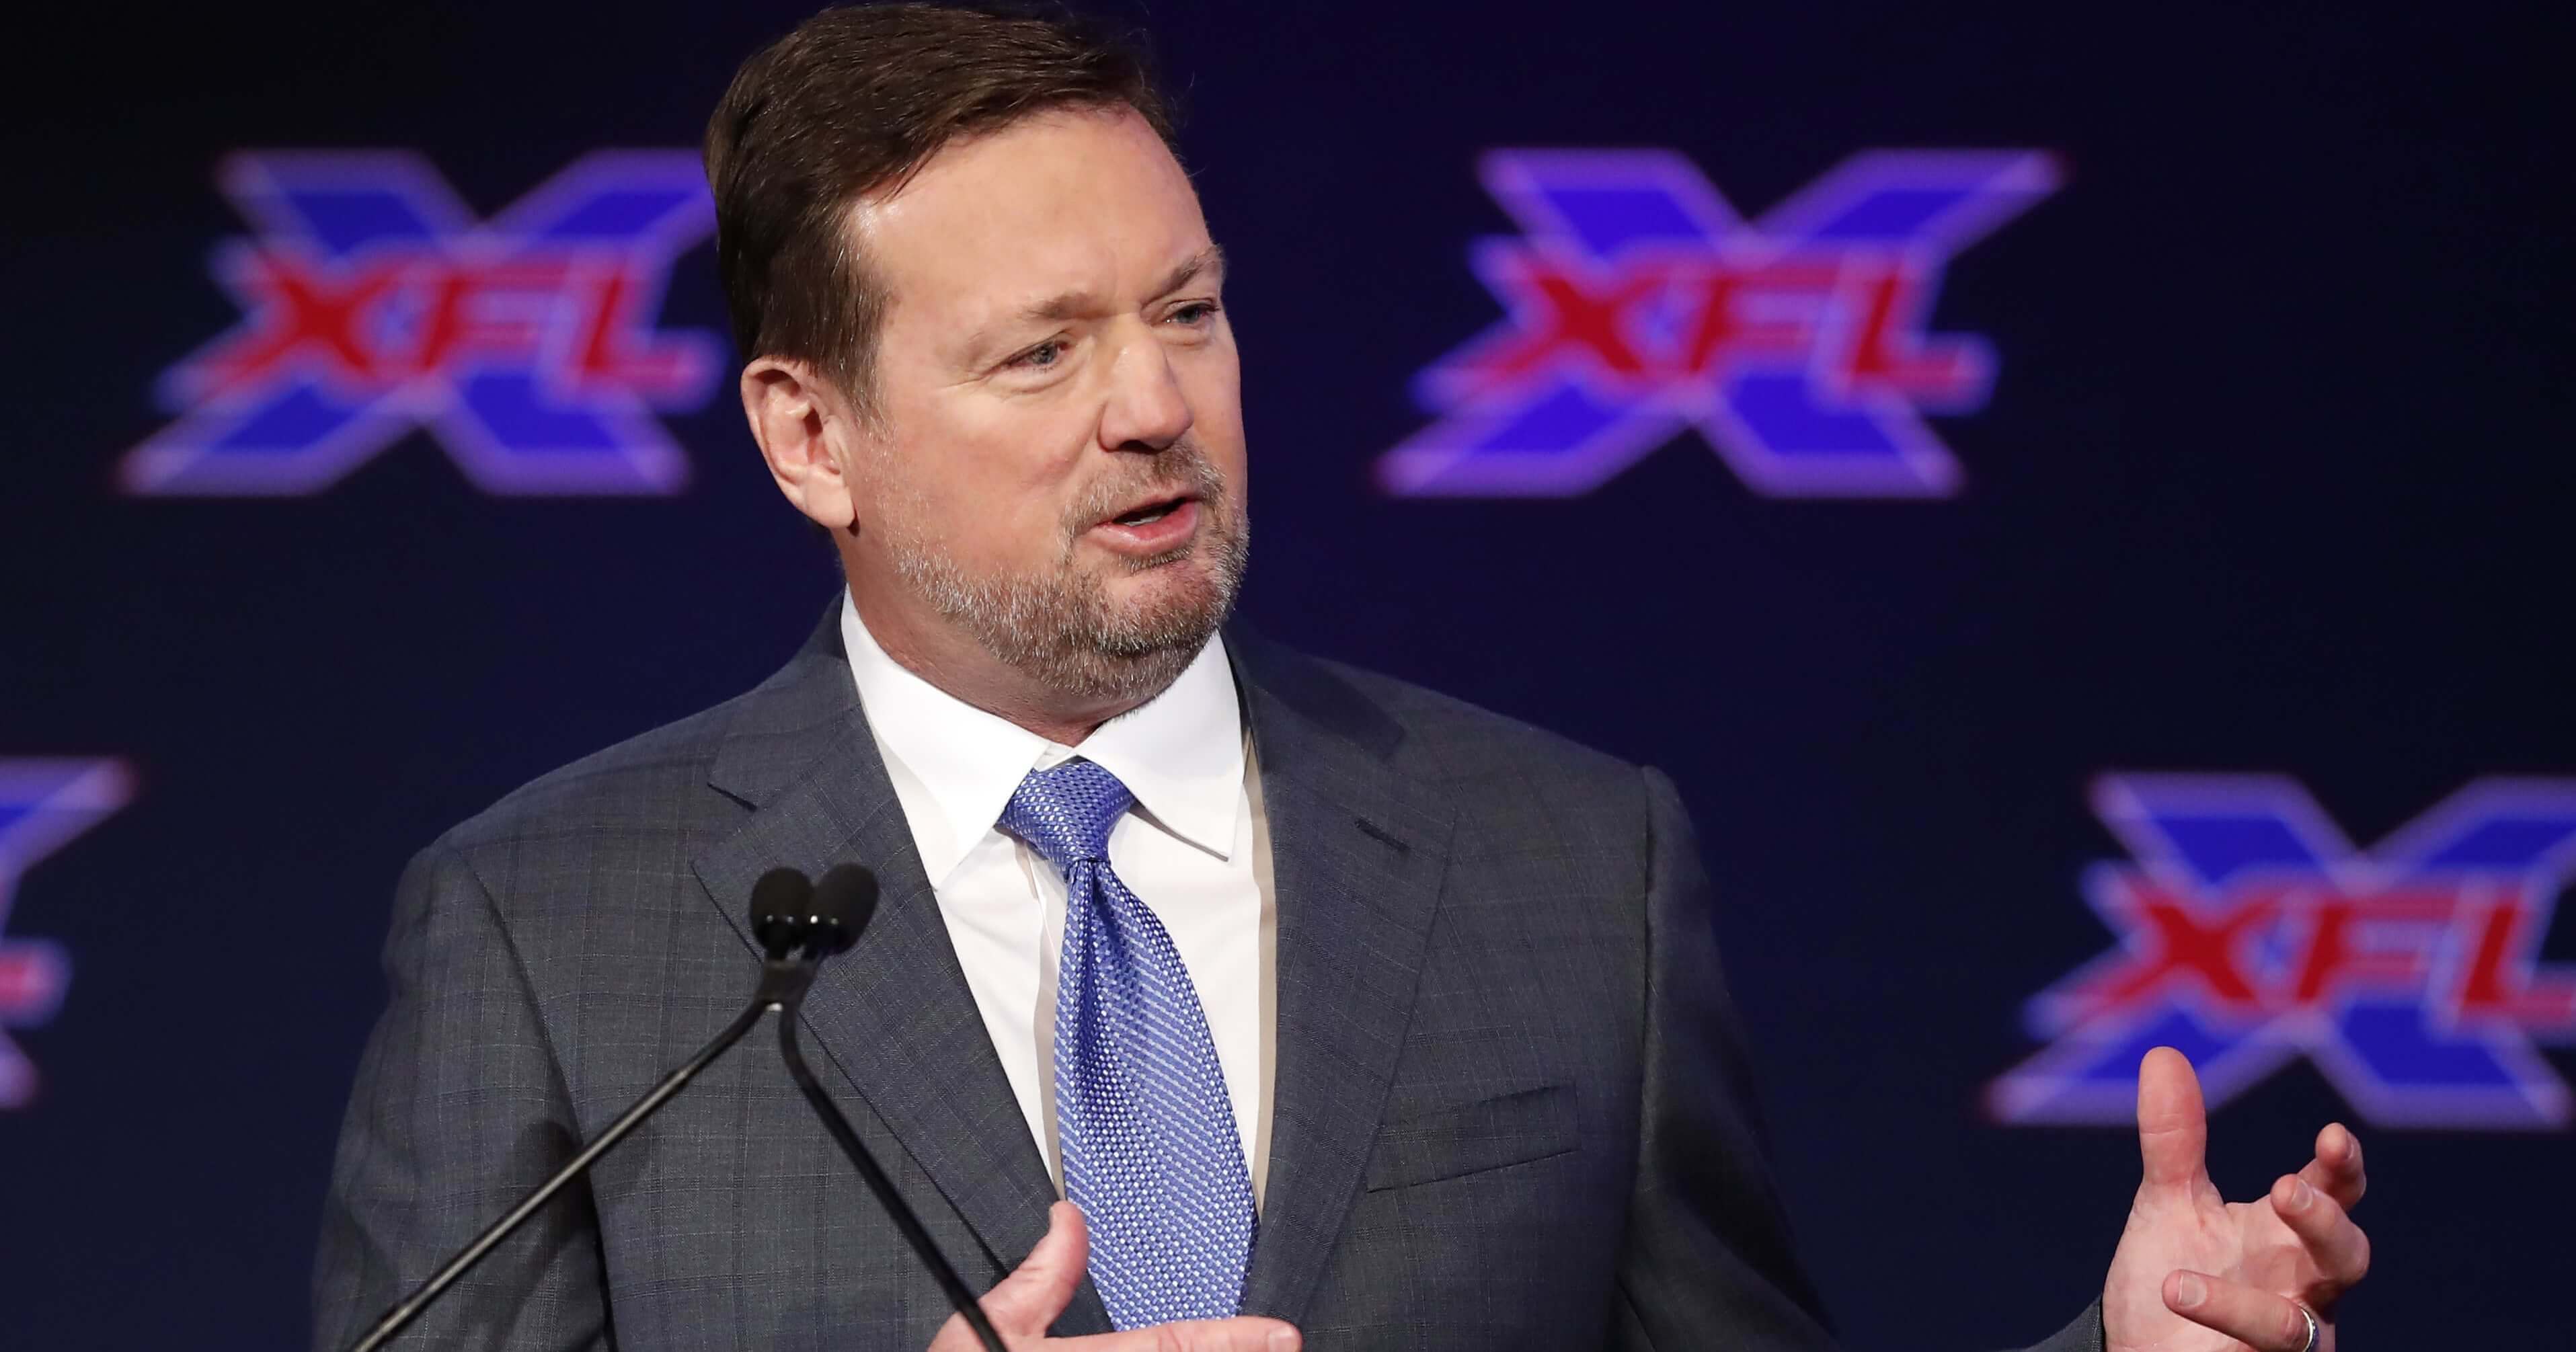 Bob Stoops speaks after being introduced as the new head coach and general manager of the XFL Dallas football team during a news conference in Arlington, Texas, on Thursday.